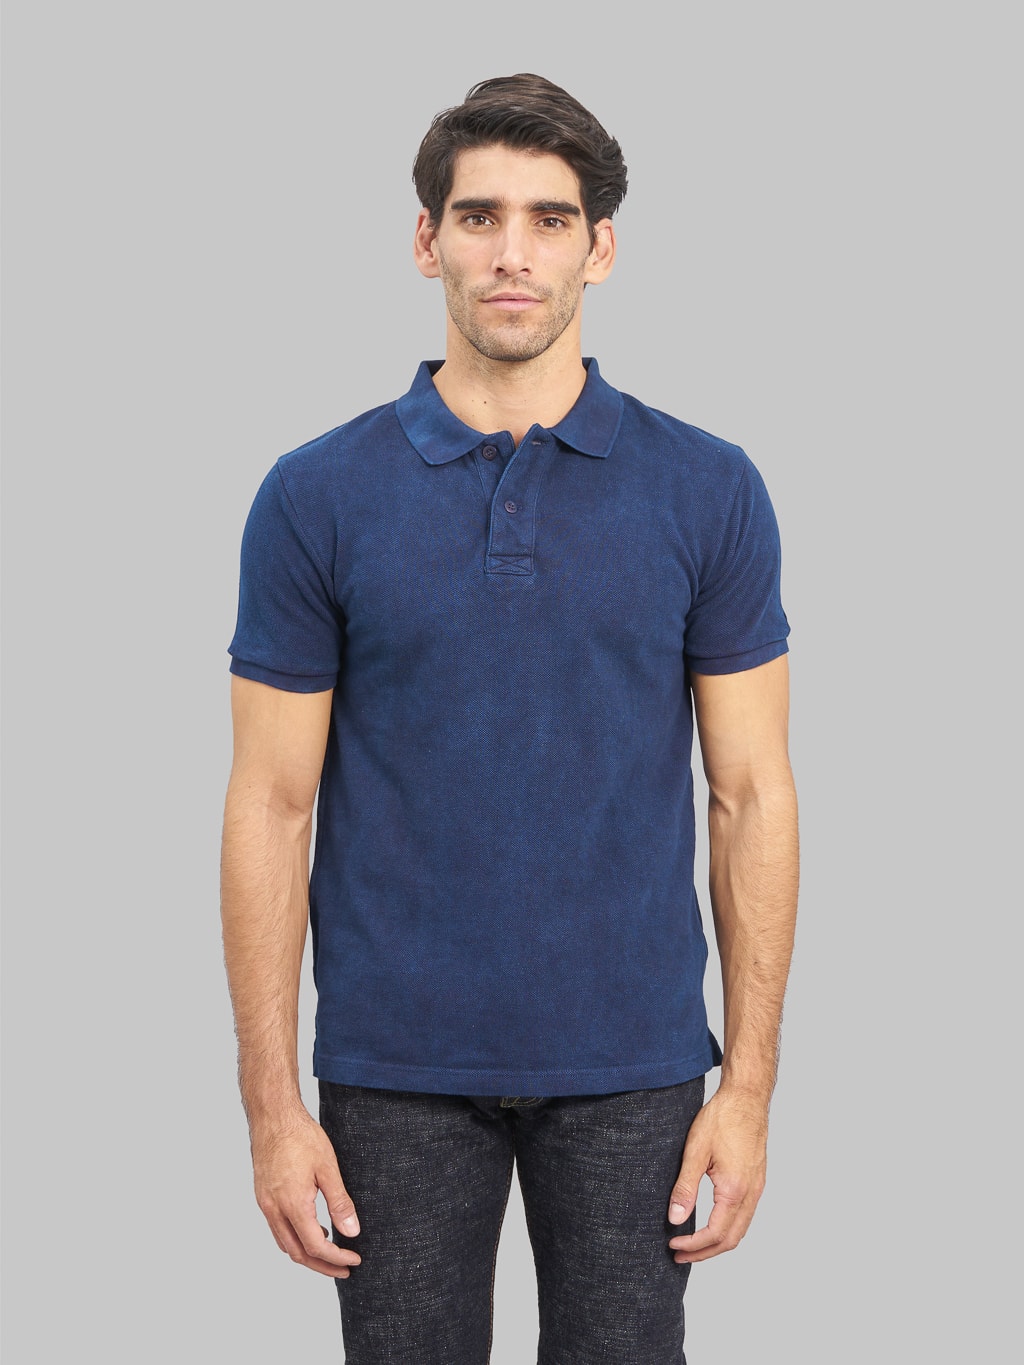 ues polo shirt indigo model front fit